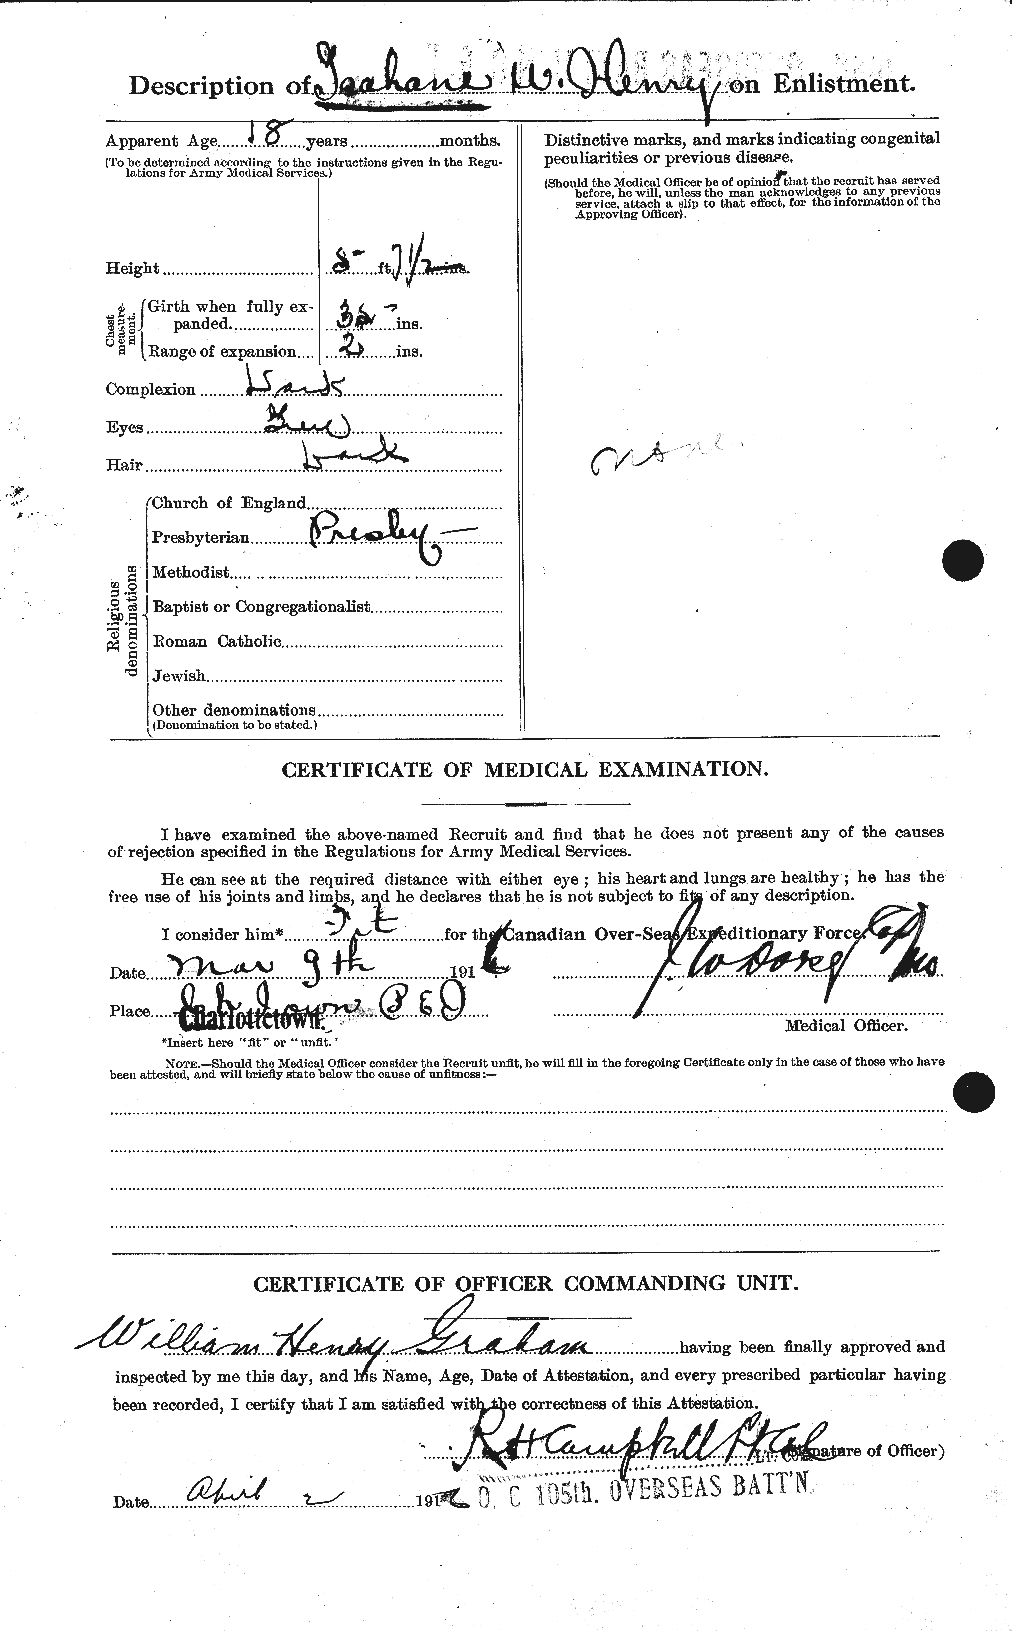 Personnel Records of the First World War - CEF 358003b